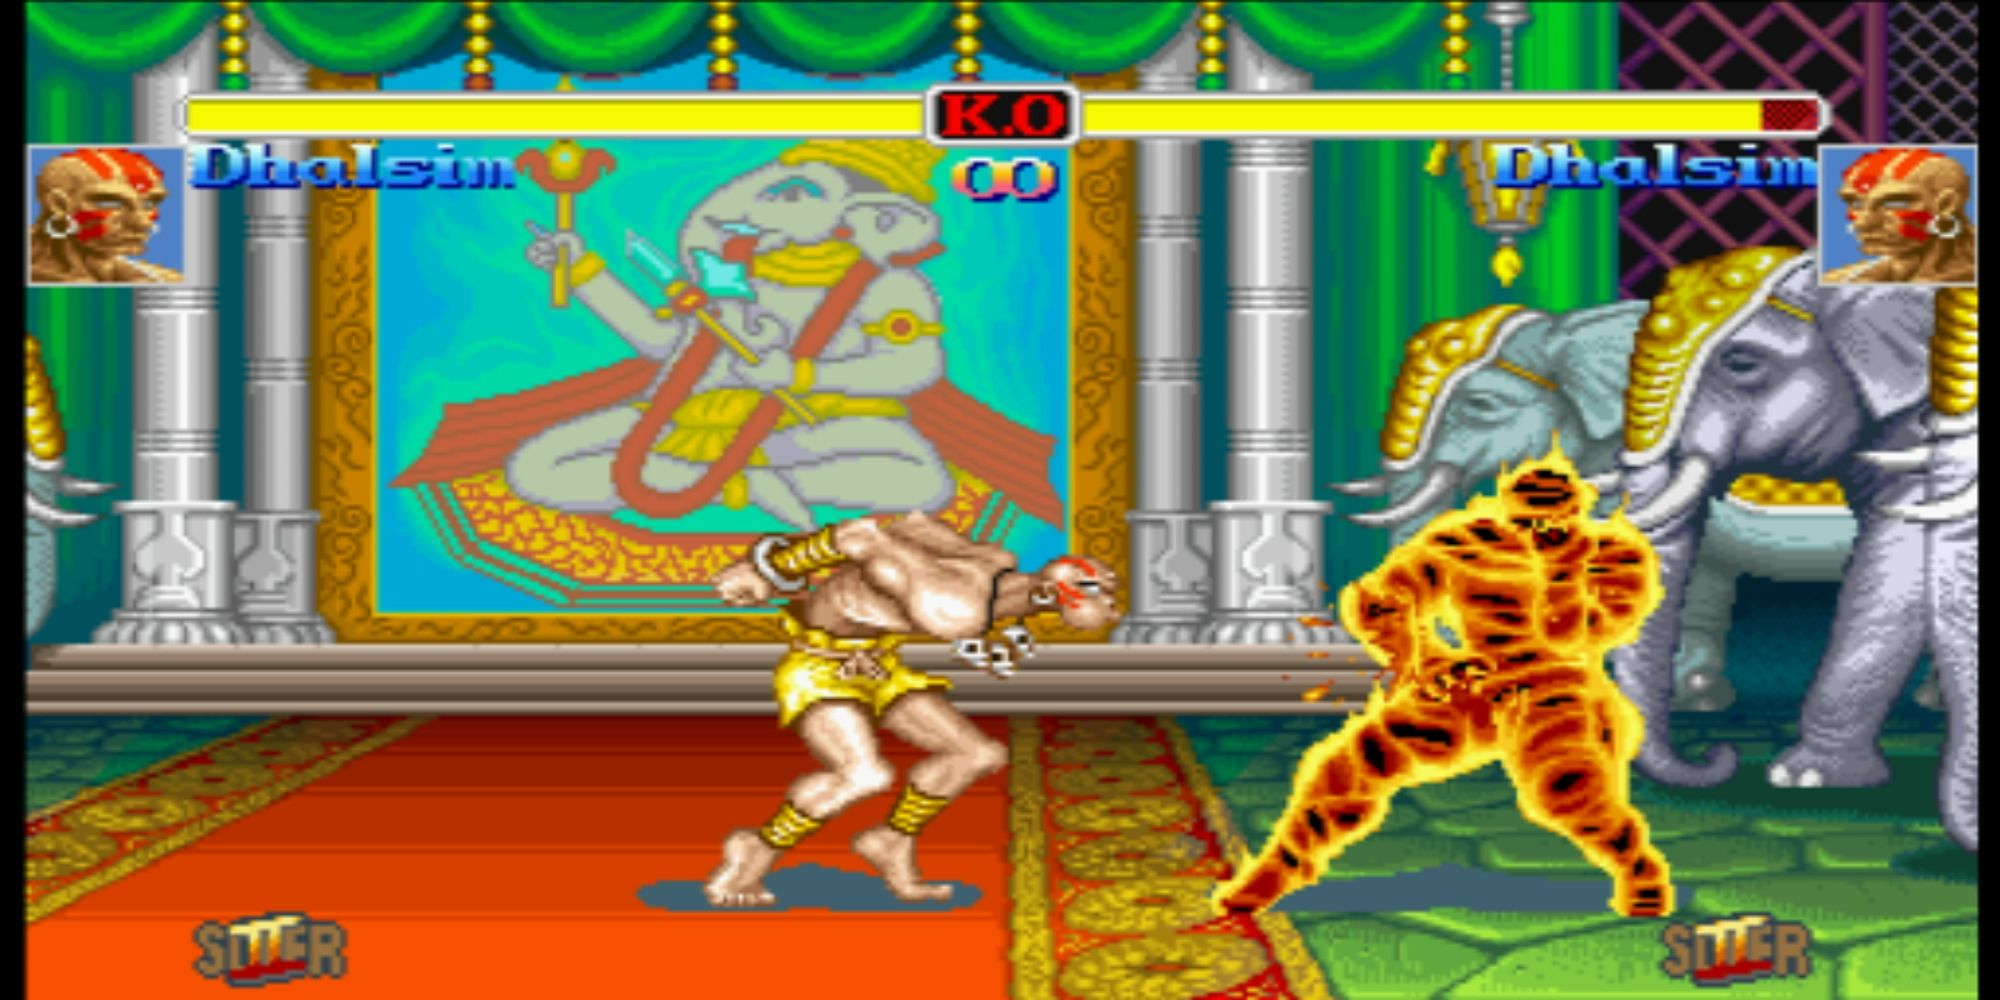 Super SF2 Dhalsim hits Dhalsim with a Yoga Fire at Maharaja's Palace in India in Hyper Street Fighter 2.